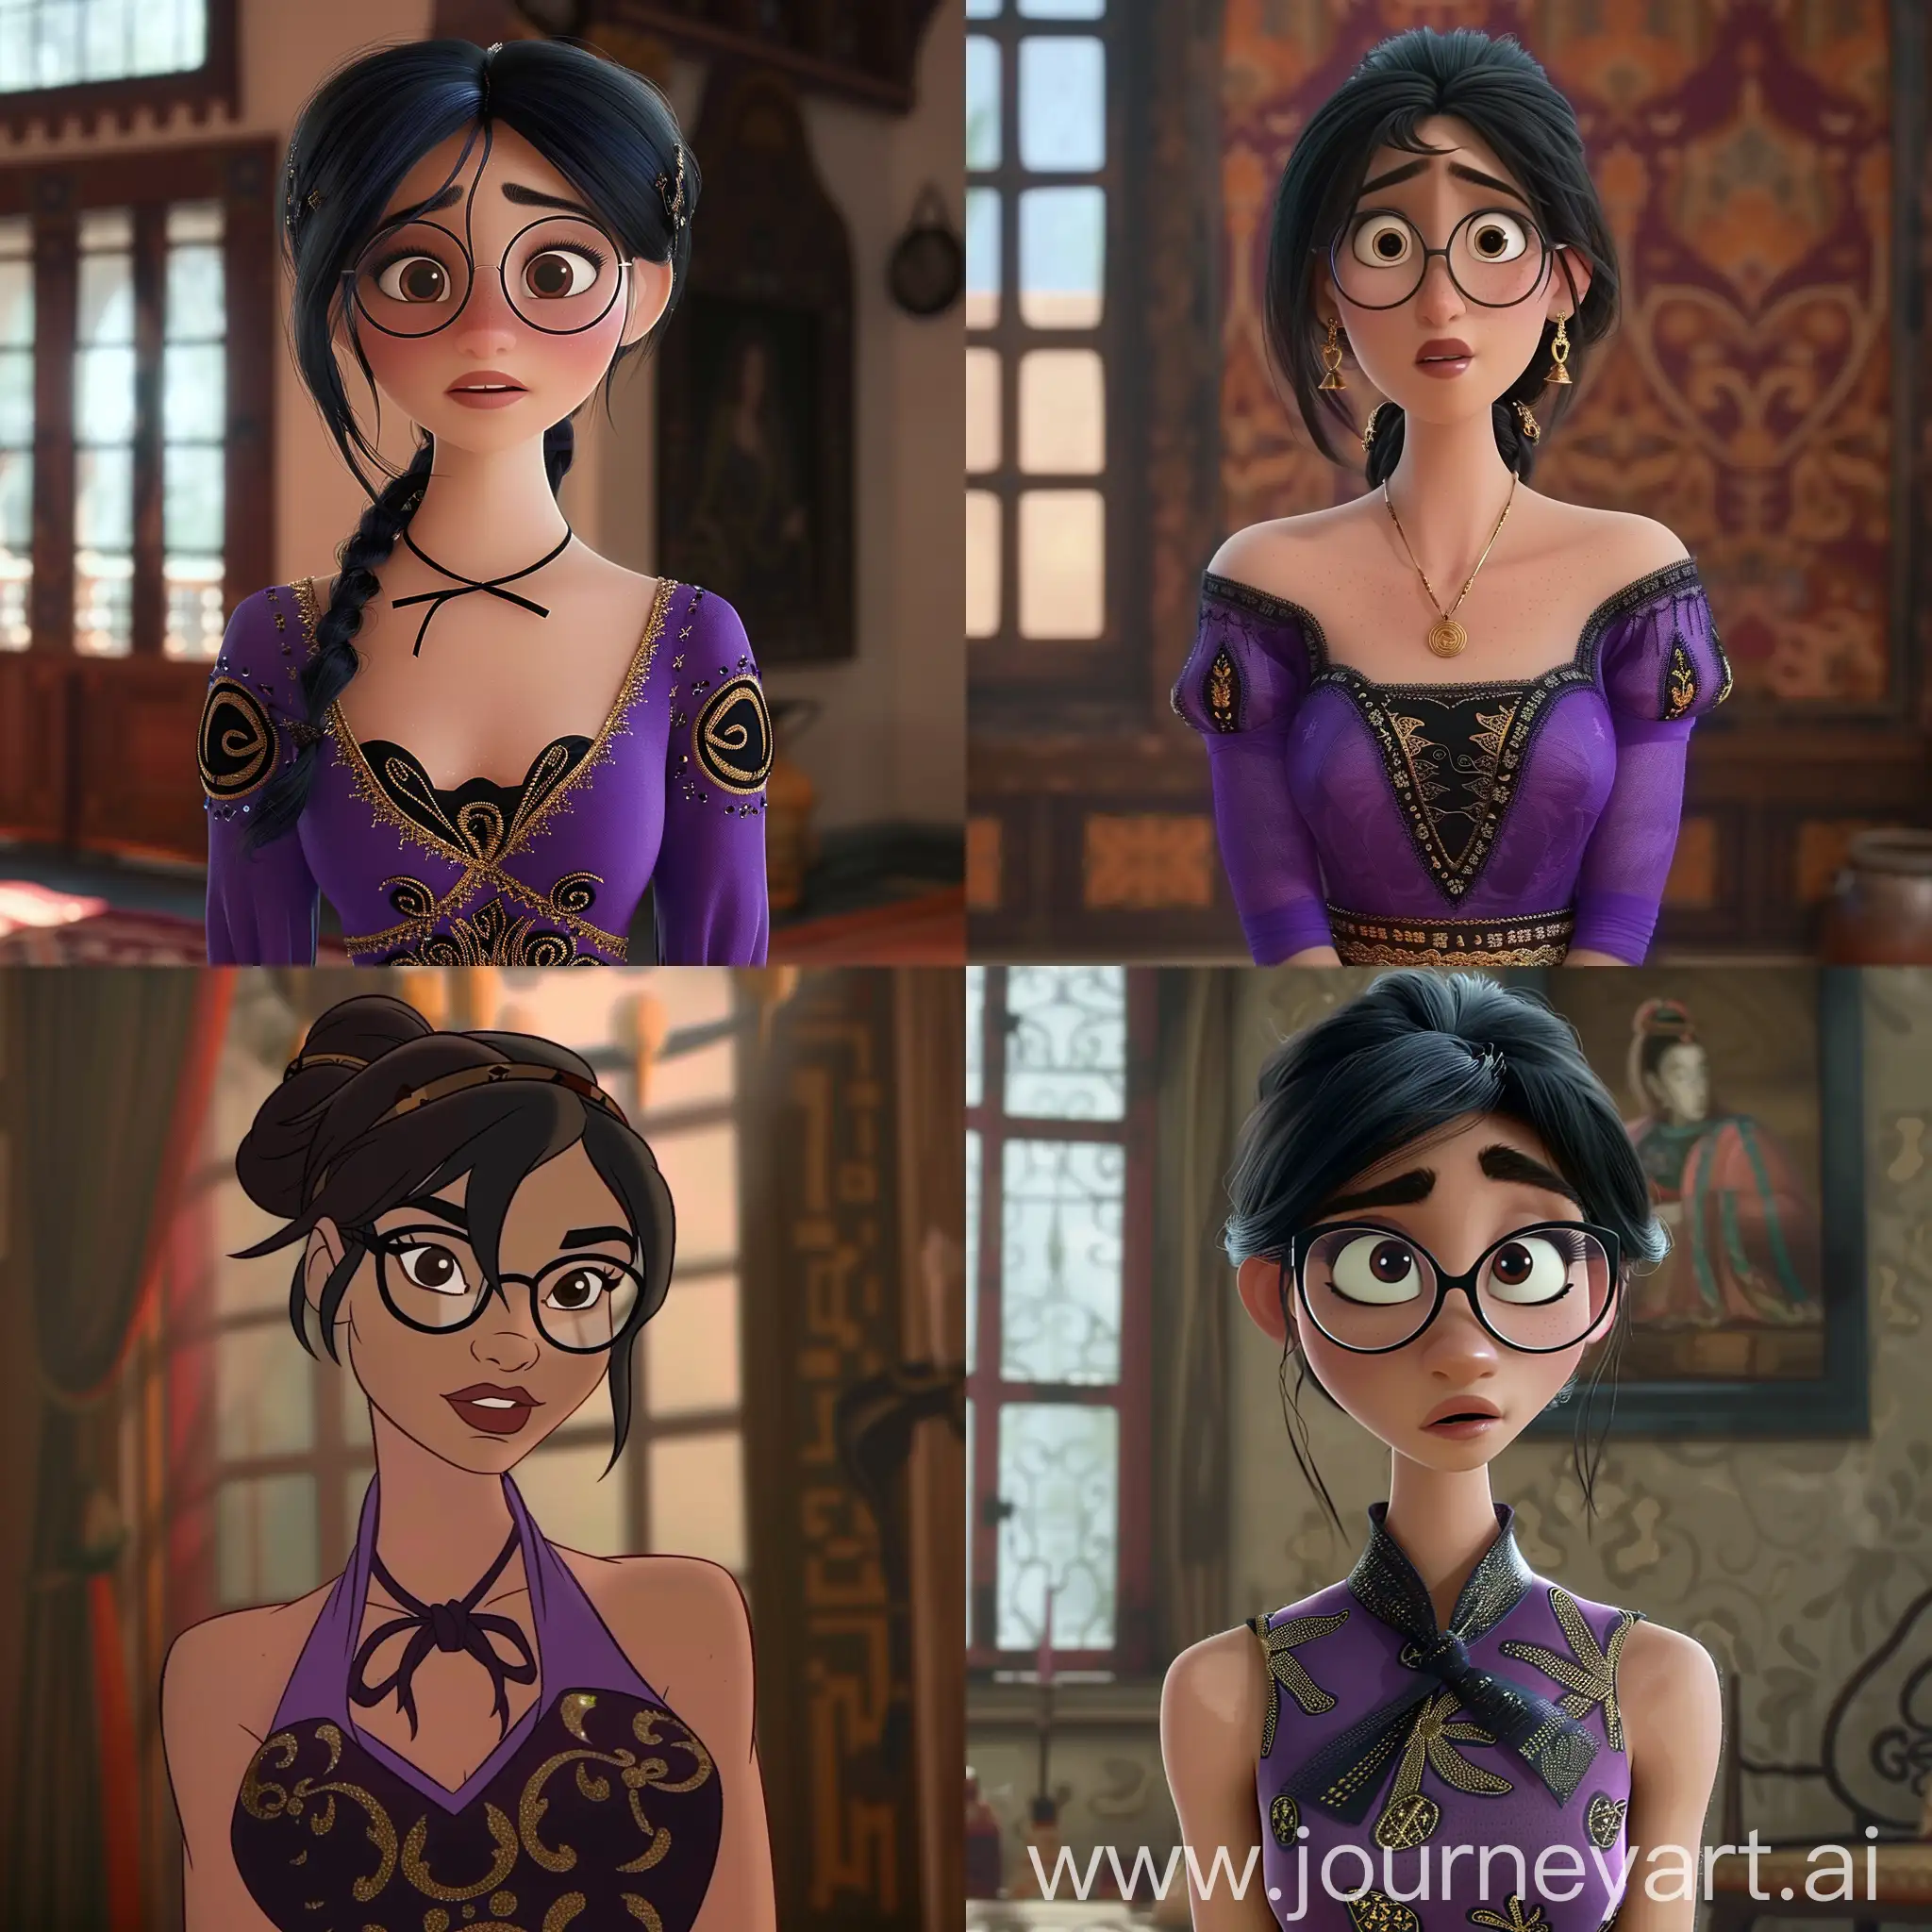 Scene from disney modern animation a brunette woman with black hair tied up, she wears glasses and is a little fat and wears a purple dress with black and gold designs for her oval face, she has a thin mouth and a wide nose